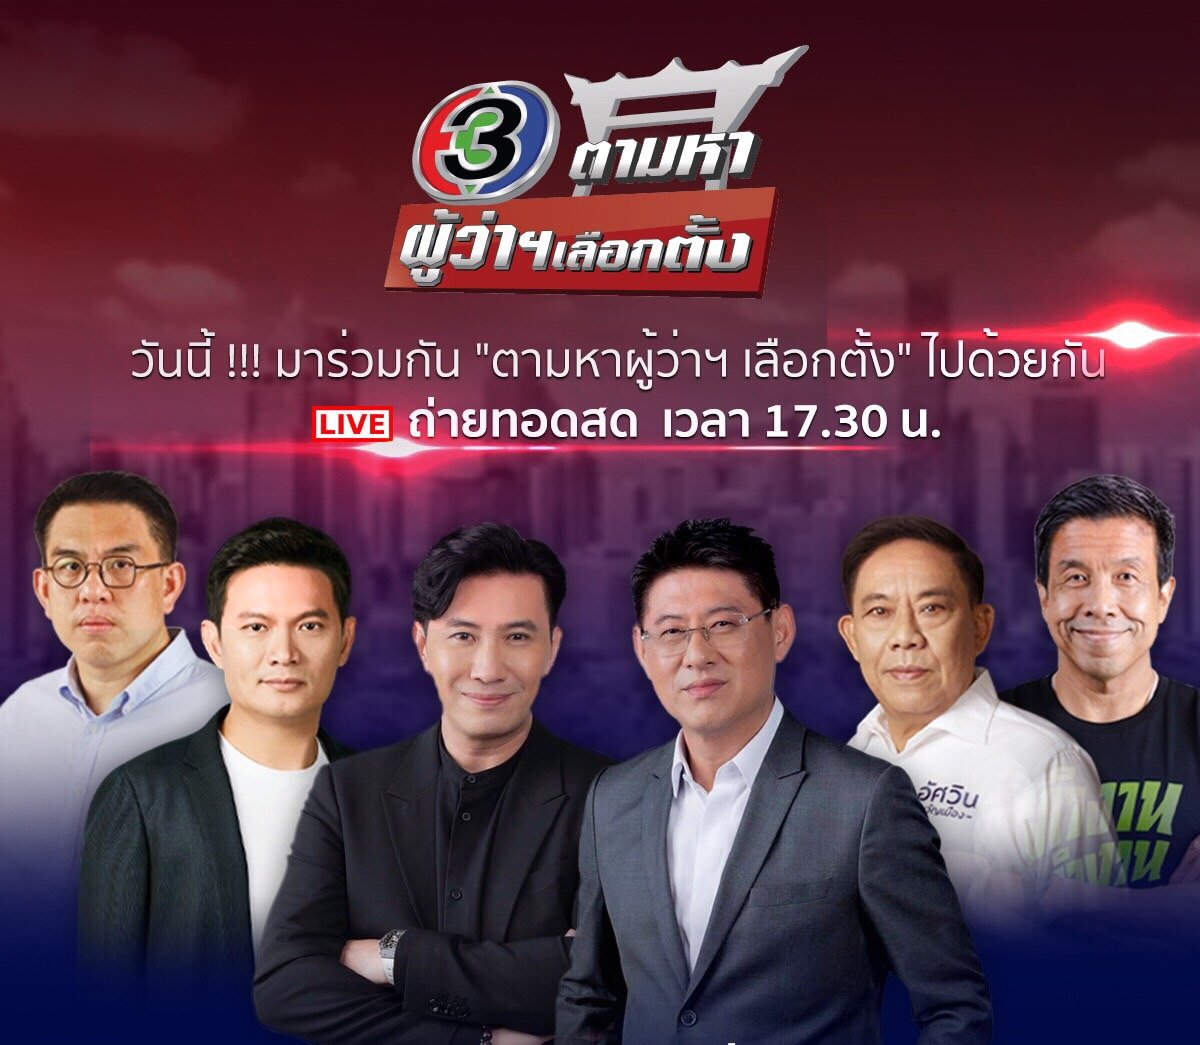 TV Channel 3 arranged live debate of Bangkok Governor, hosted by Sorayuth and Kanchai